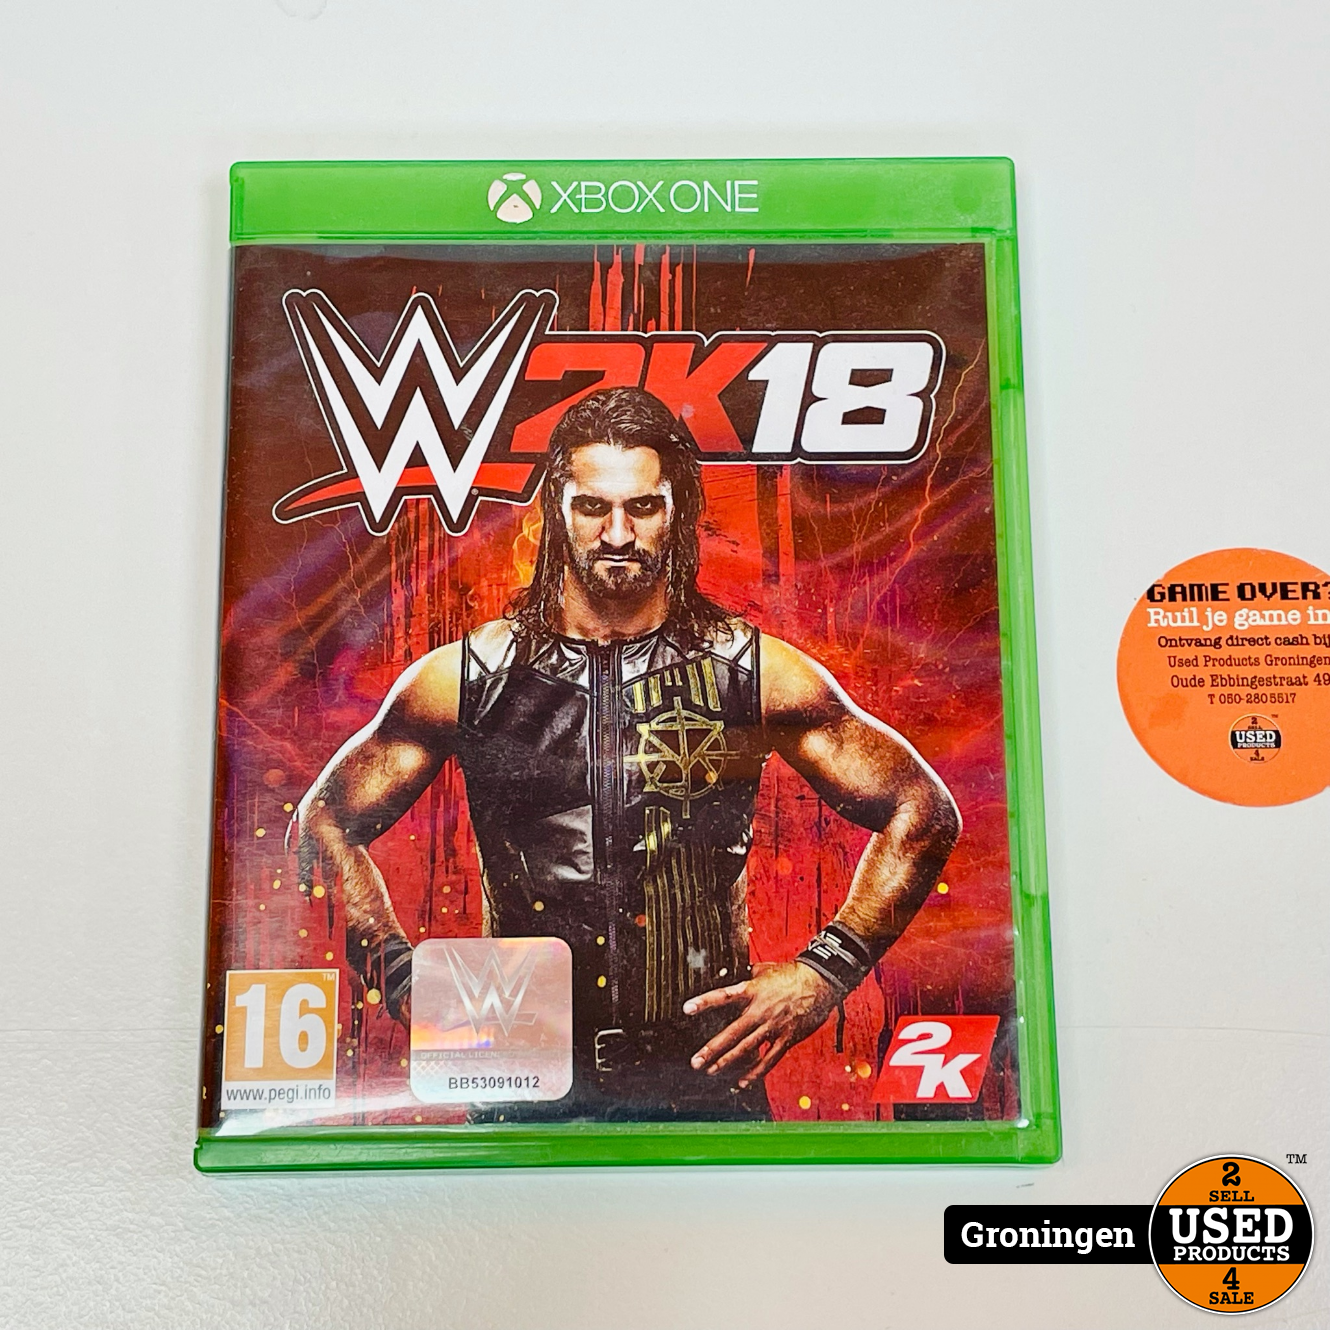 Uitgaan Previs site Stemmen Microsoft Xbox One [Xbox One] WWE 2K18 - Used Products Groningen